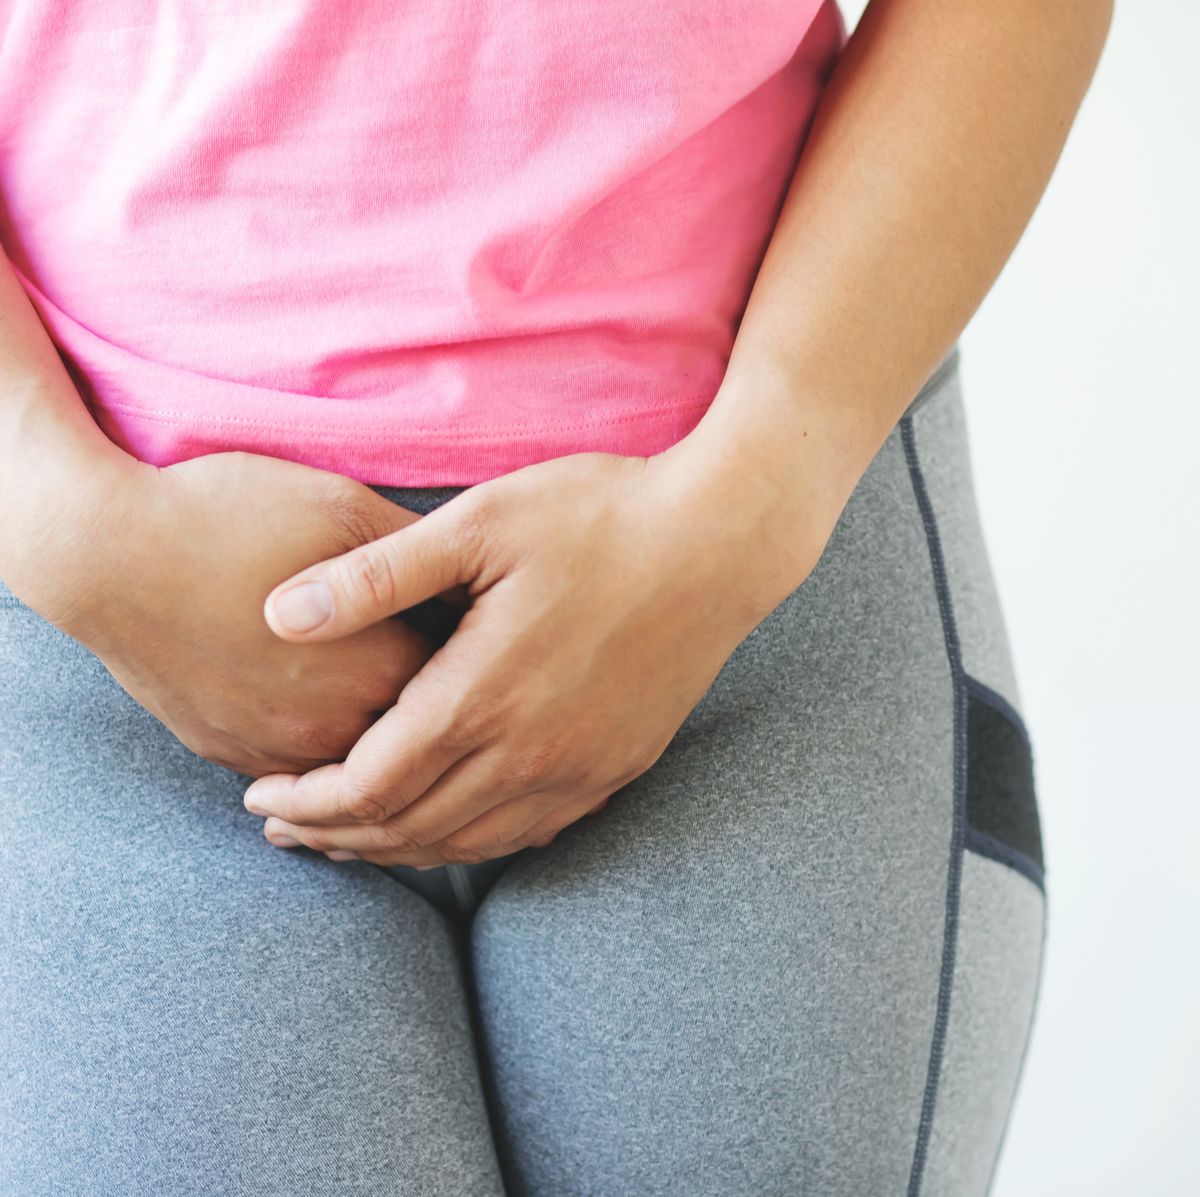 Itchy Vulva for Months? It Could Be Your Pelvic Floor